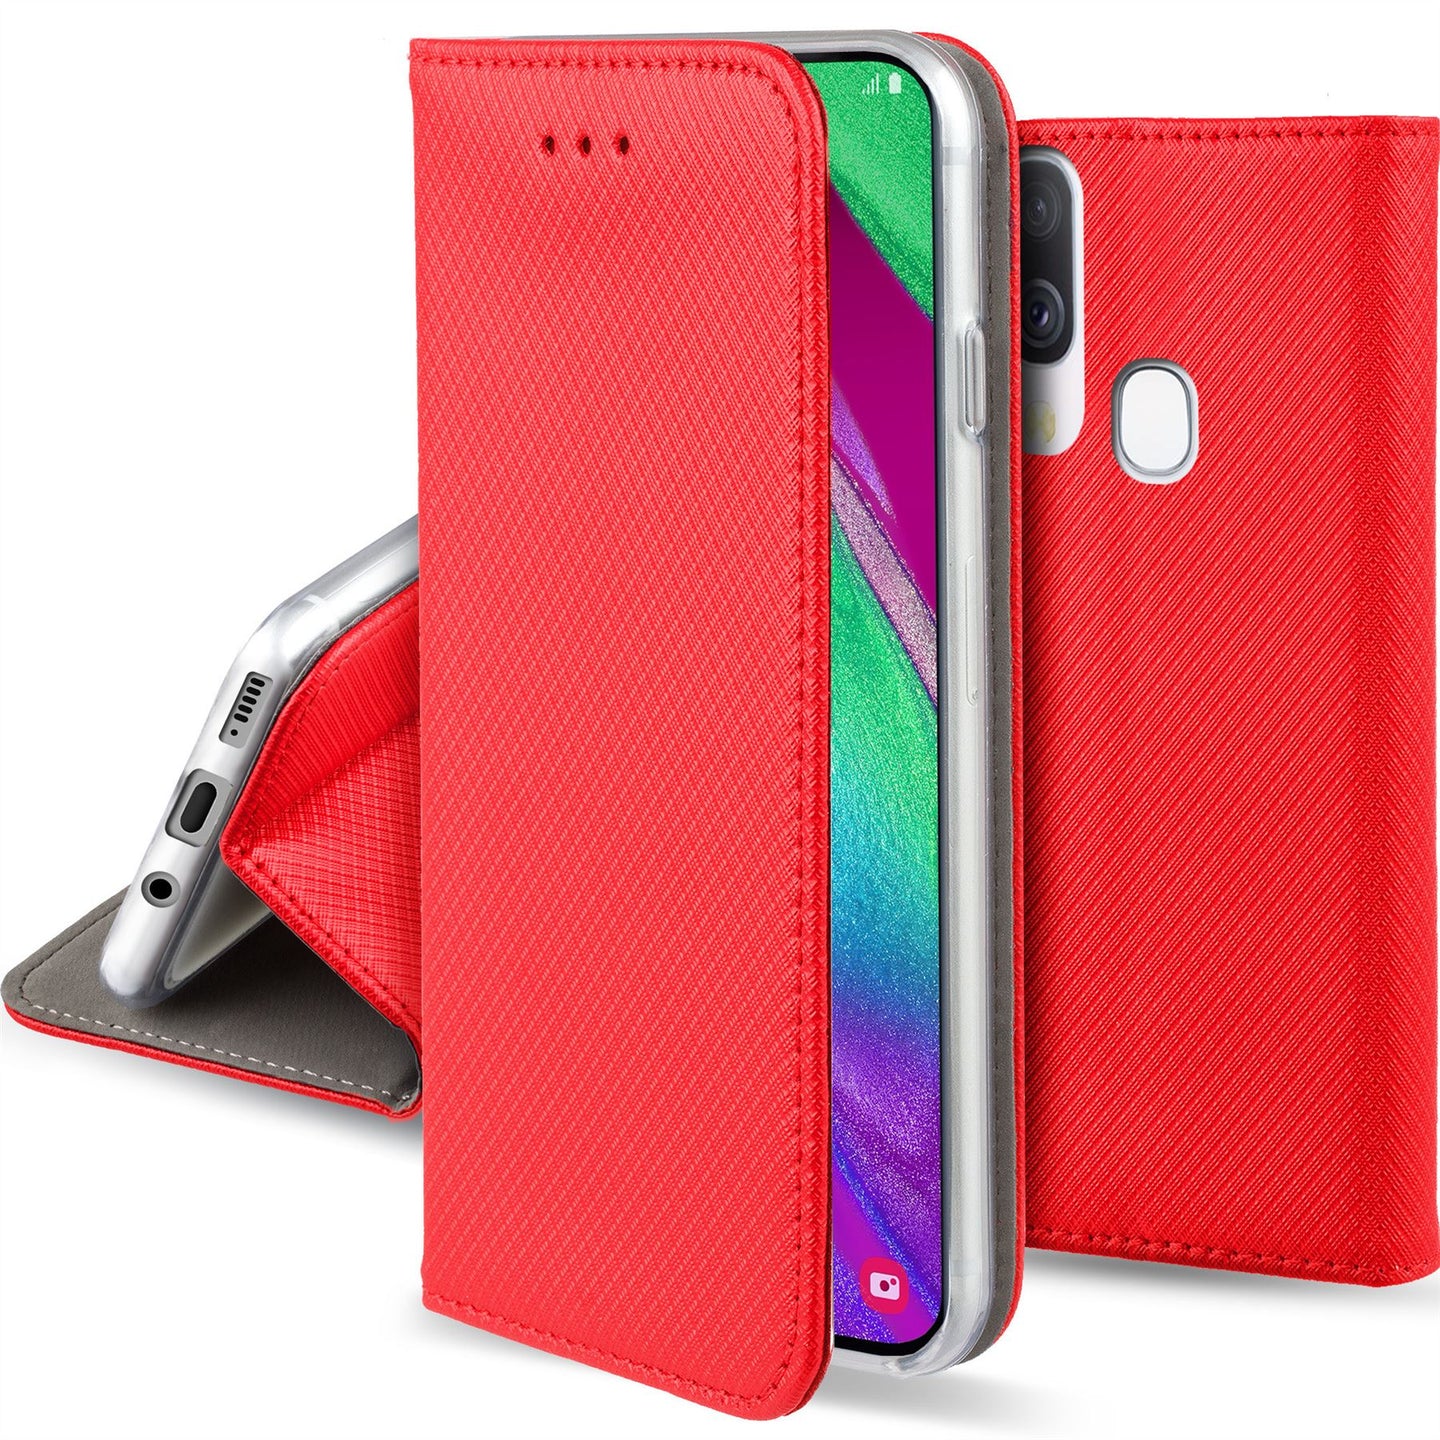 Moozy Case Flip Cover for Samsung A40, Red - Smart Magnetic Flip Case with Card Holder and Stand